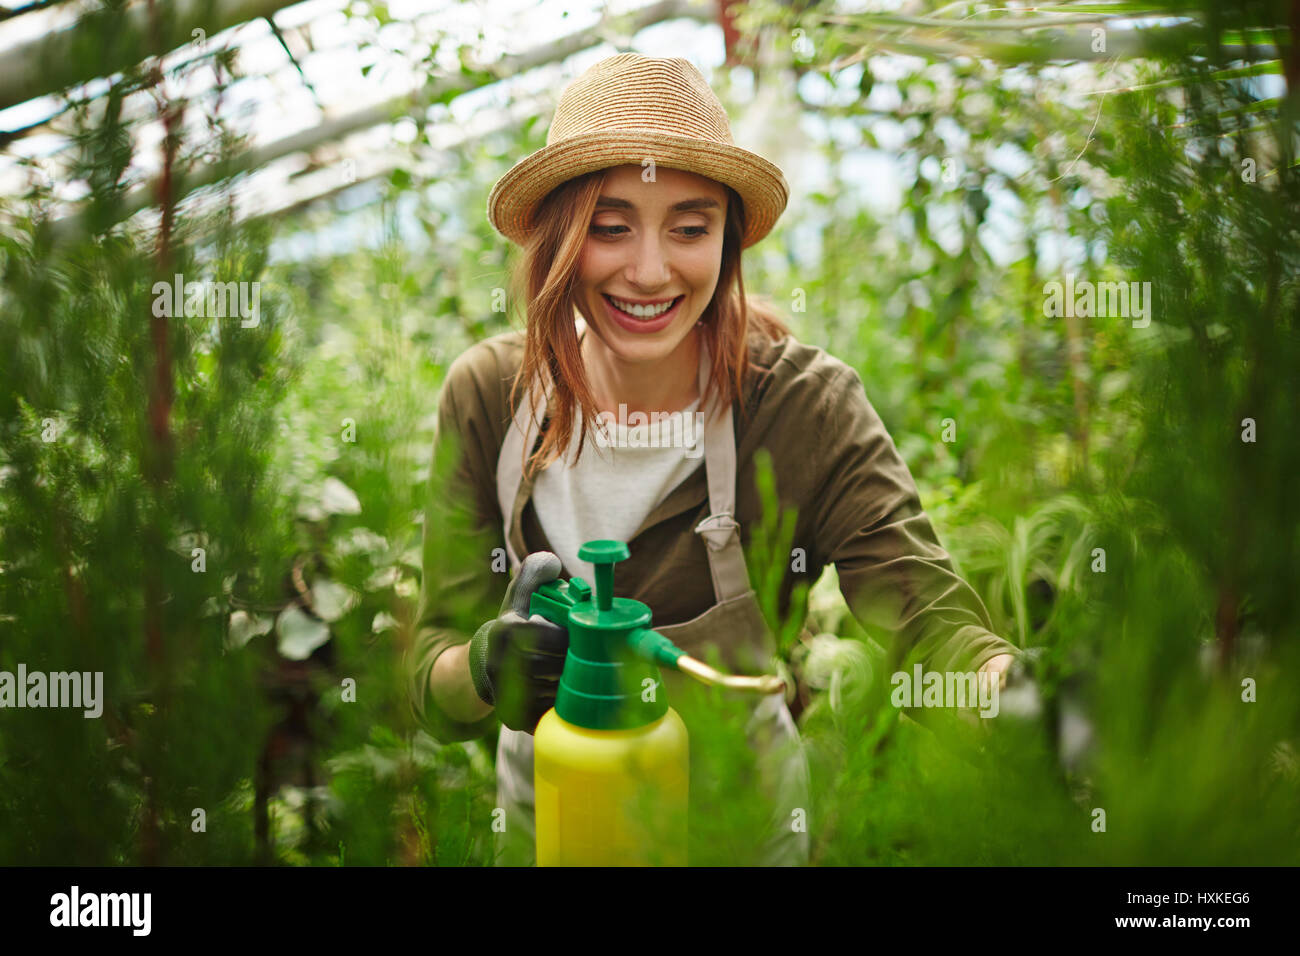 Young Woman Spray Treating Plants in Glasshouse Stock Photo